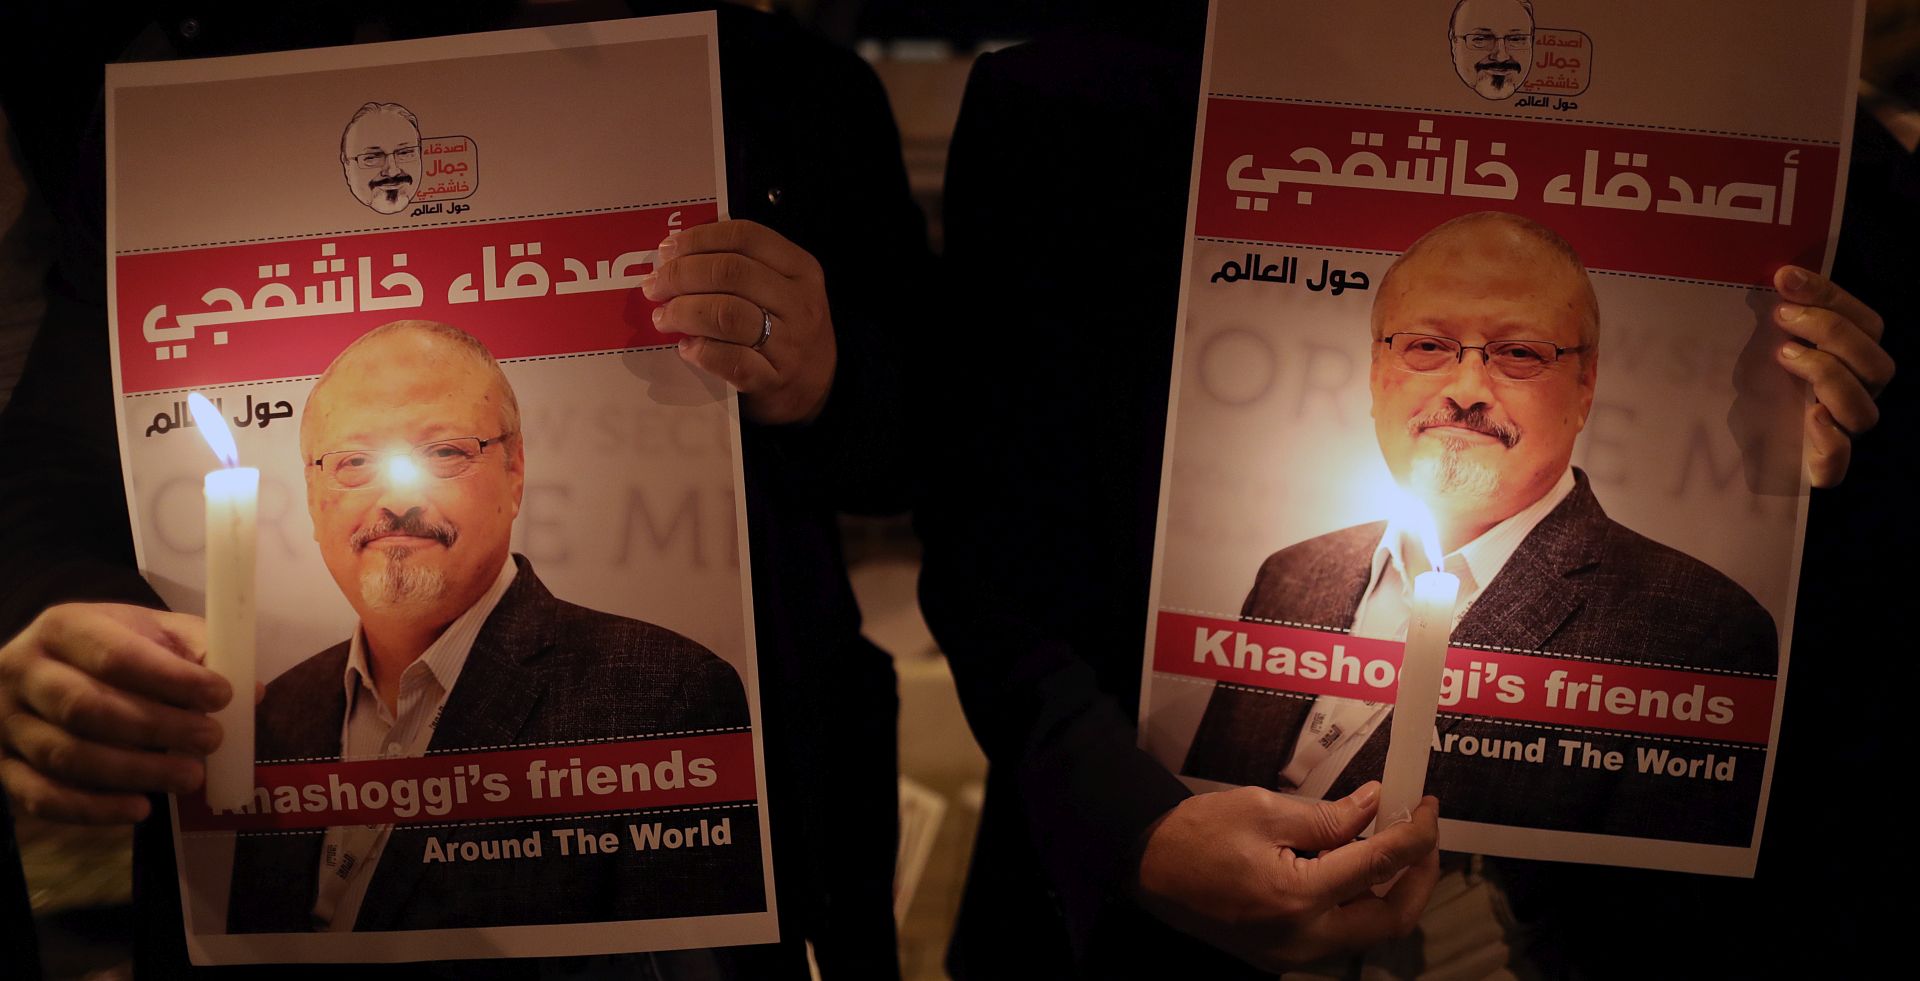 epa07657326 (FILE) - Protestors hold candles and pictures of Jamal Khashoggi during a demonstration in front of the Consulate of Saudi Arabia in Istanbul, Turkey, 25 October 2018 (reissued 19 June 2019). UN extrajudicial executions investigator Agnes Callamard is ser to release on 19 June 2019, her report on the murder of Saudi journalist Jamal Khashoggi. Callamard, who has led an international inquiry into Khashoggi's death, would present her report to the UN Human Rights Council on 26 June 2019, whose 47 member states include Saudi Arabia. Saudi dissident journalist Jamal Khashoggi, whose remains have not been found, was assassinated at the Saudi Arabian consulate building in Istanbul on 02 October 2018.  EPA/ERDEM SAHIN *** Local Caption *** 54786449